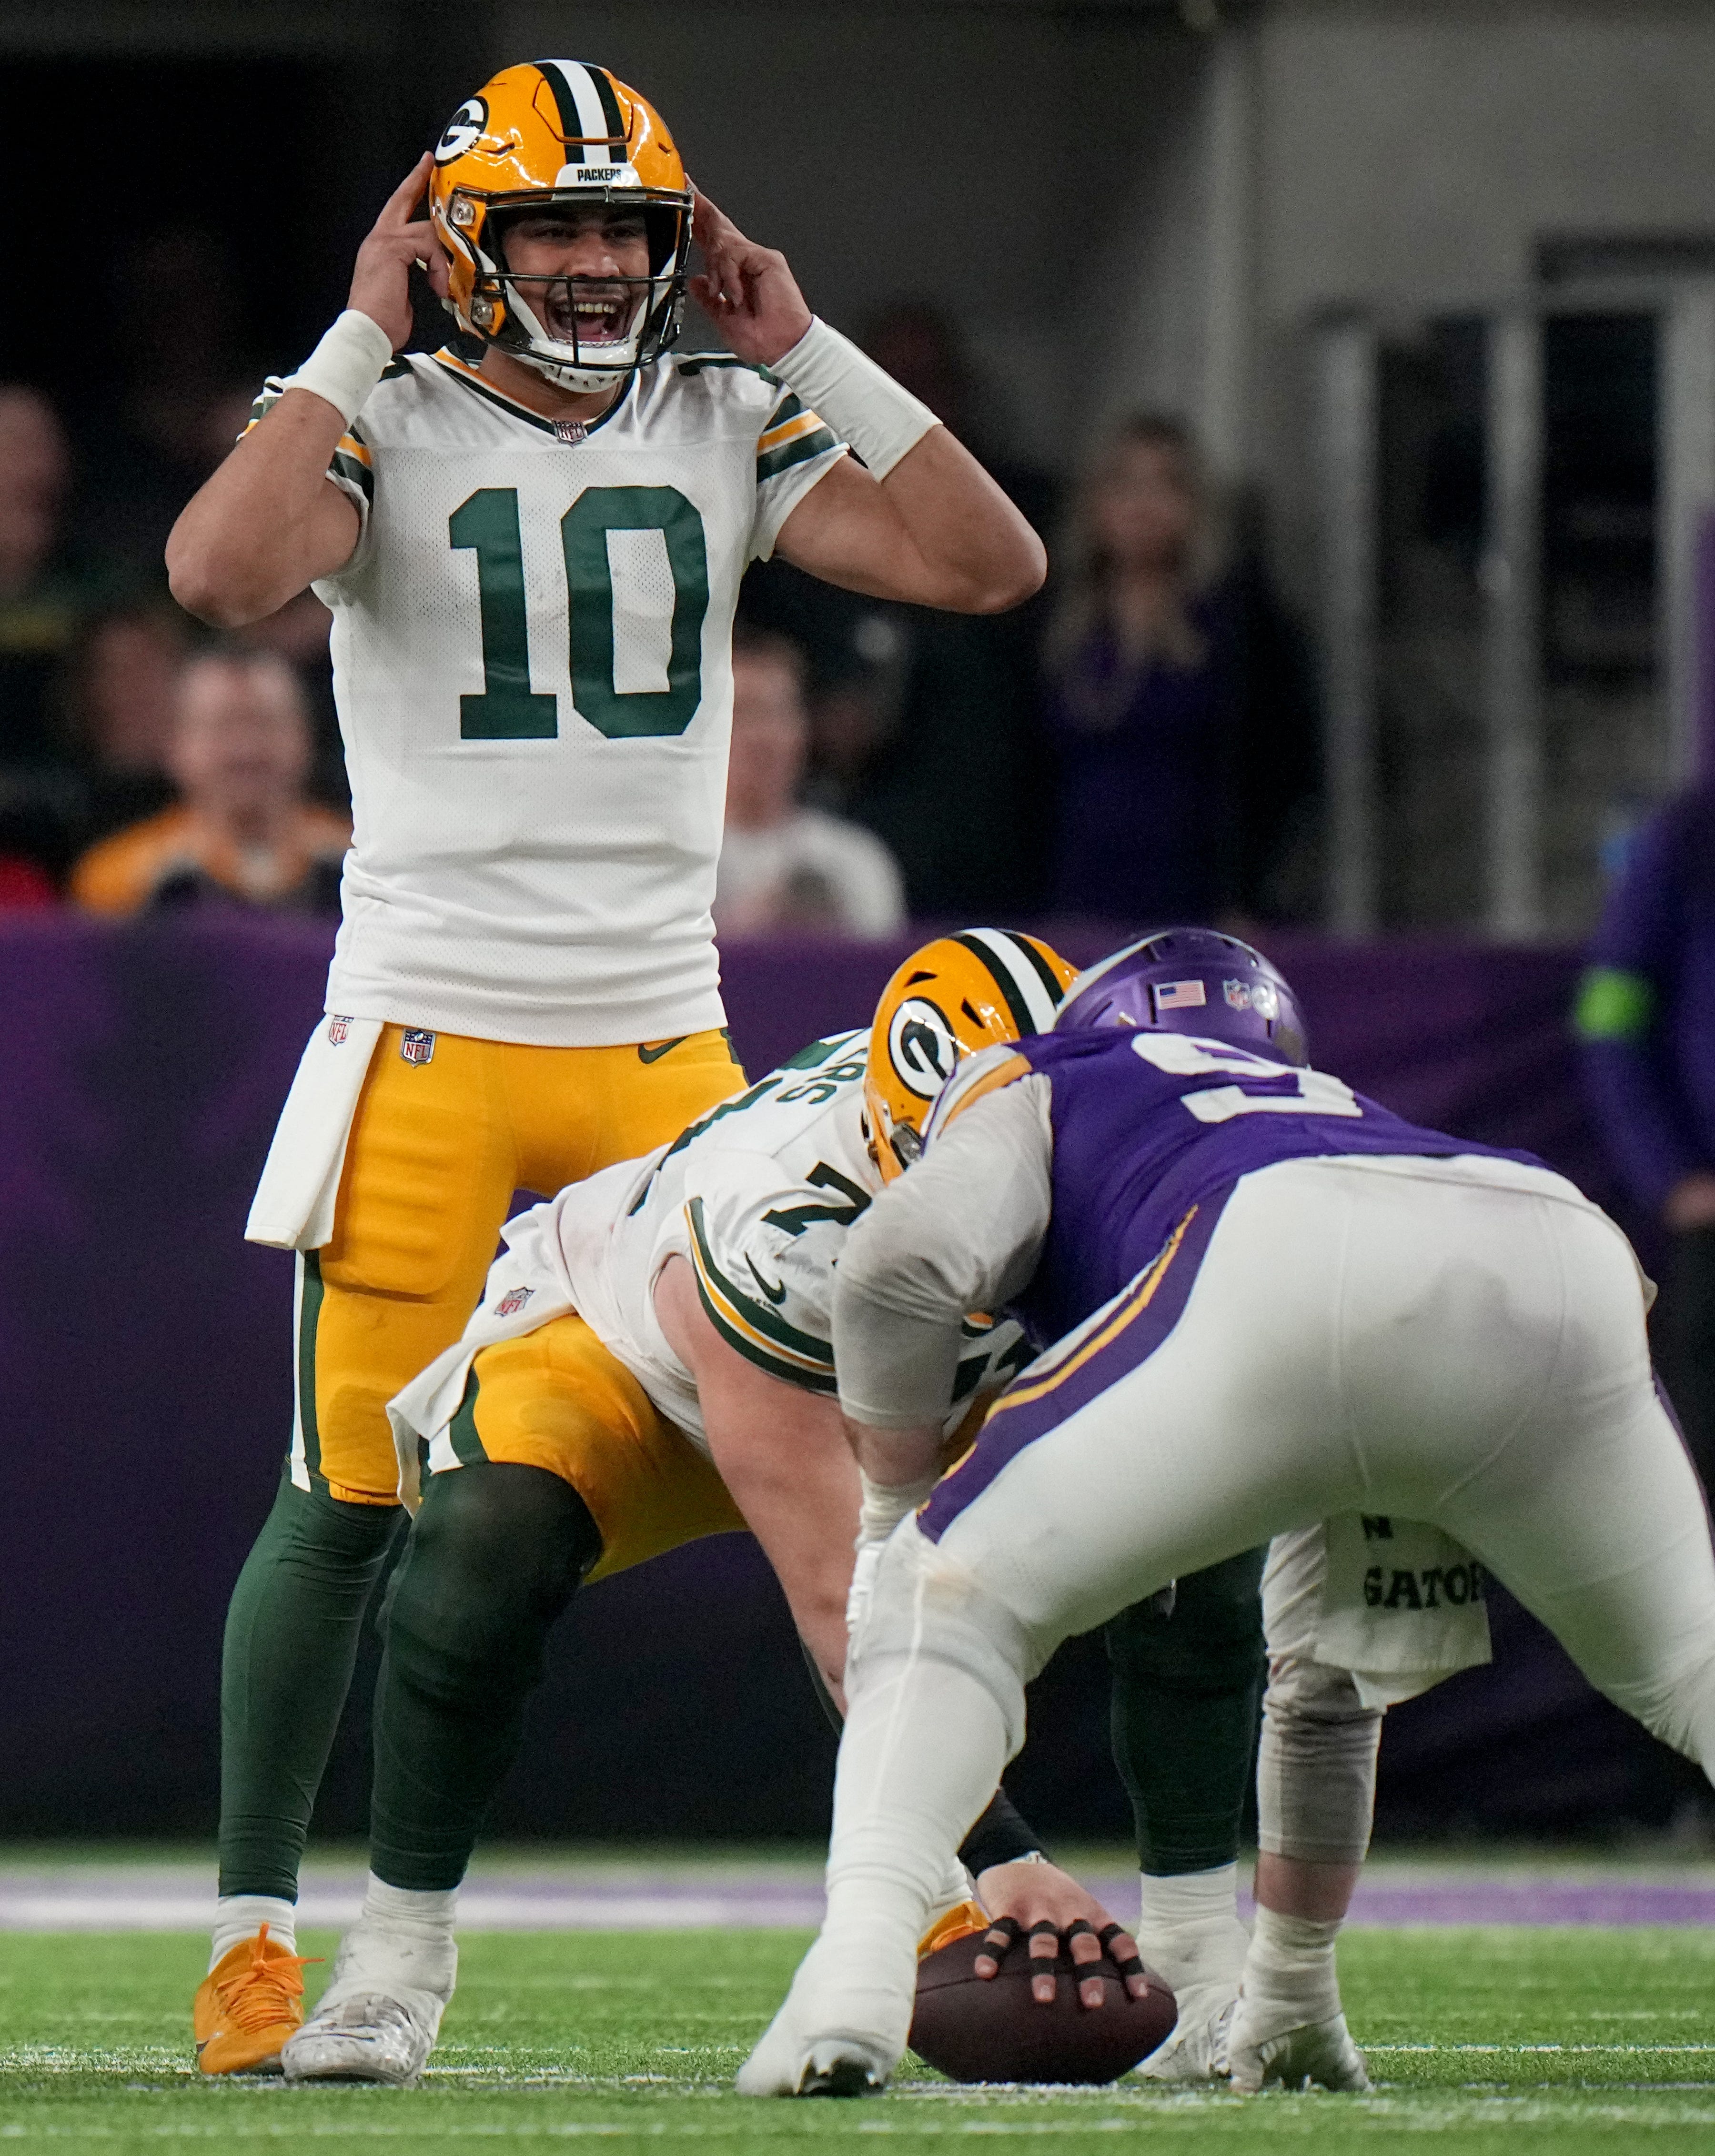 Green Bay Packers quarterback Jordan Love (10) makes an adjustment at the line during the fourth quarter of their game Sunday, December 31, 2023 at U.S. Bank Stadium in Minneapolis, Minnesota. The Green Bay Packers beat the Minnesota Vikings 33-10.